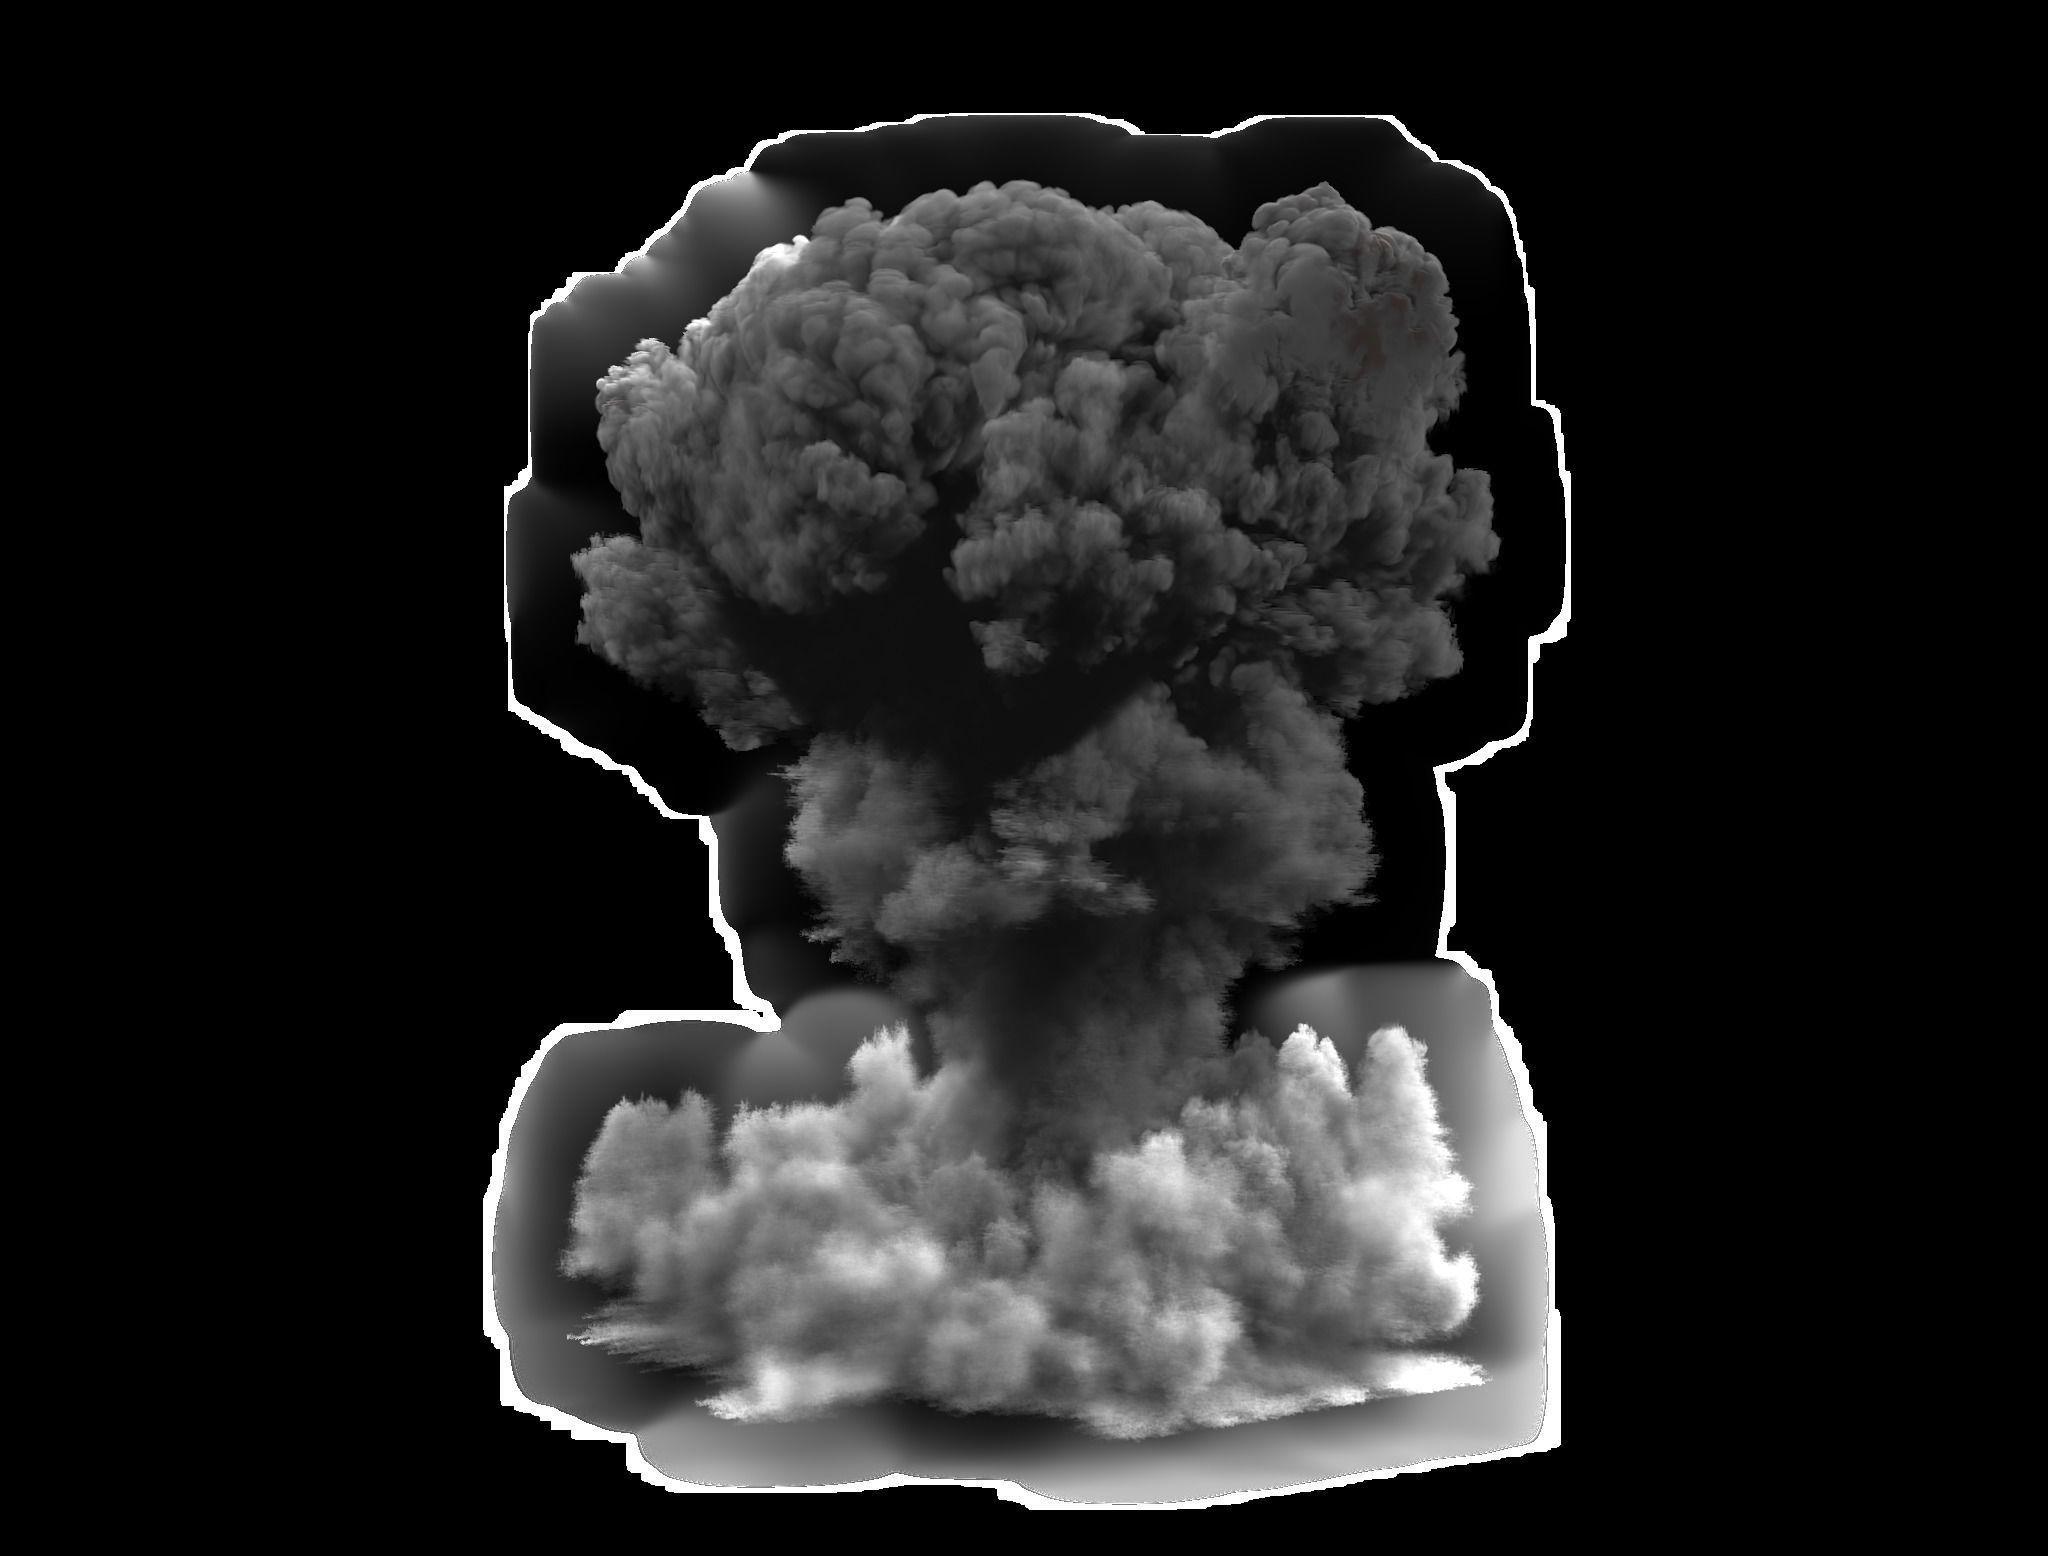 #1009999080, A Nuclear Explosion, Wallpaper V - Monochrome , HD Wallpaper & Backgrounds